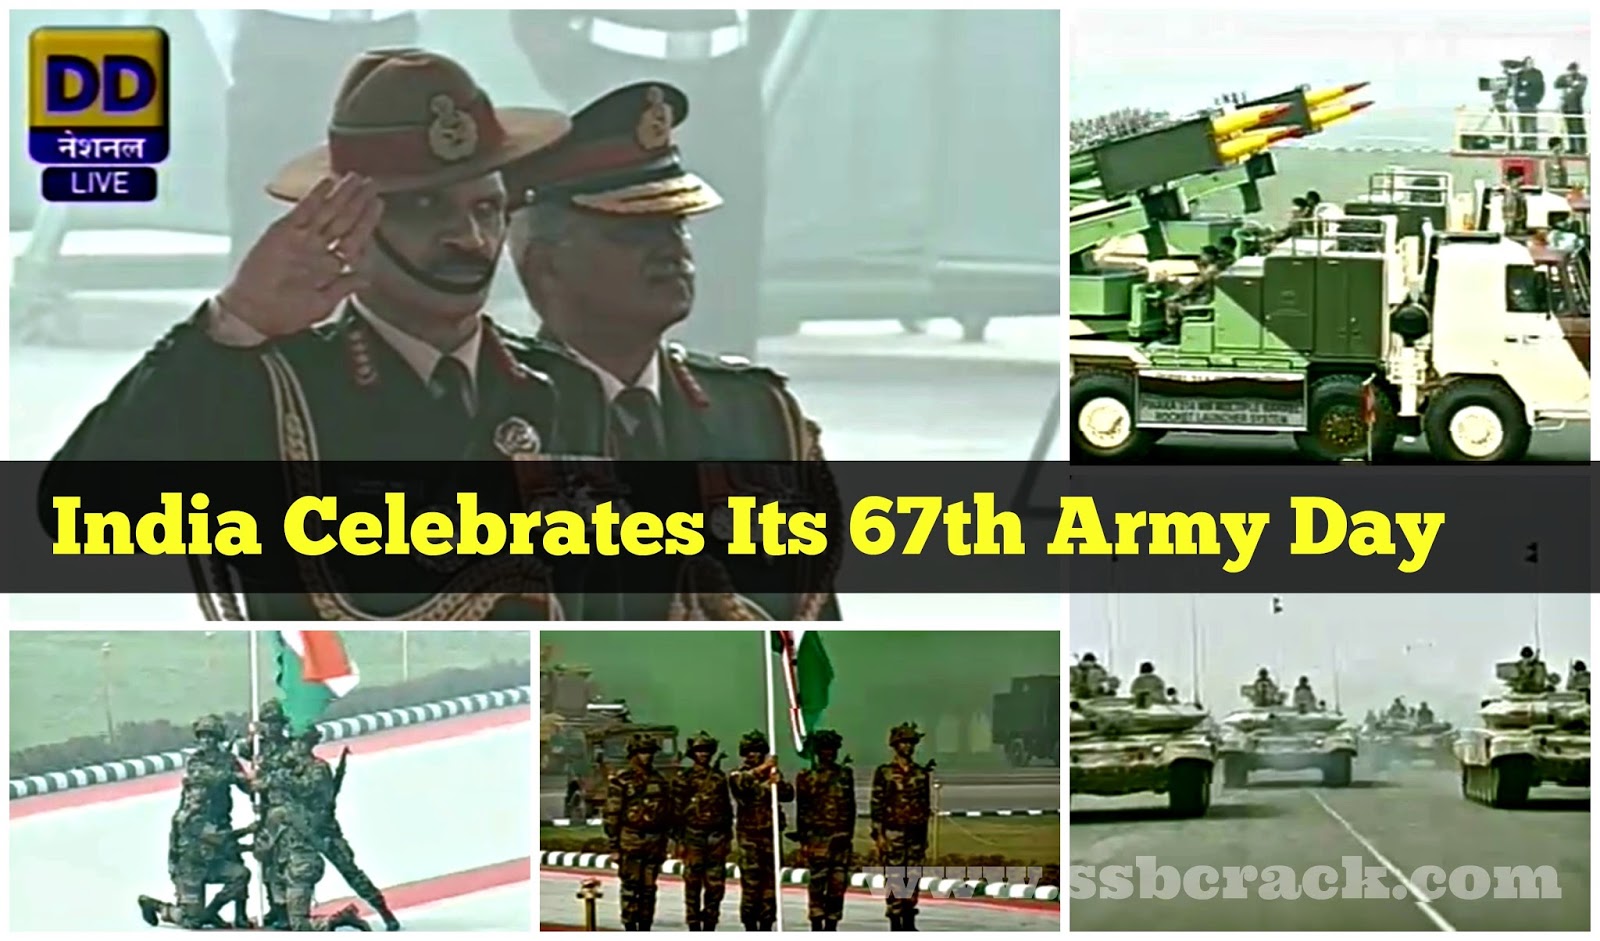 India Celebrates Its 67th Army Day